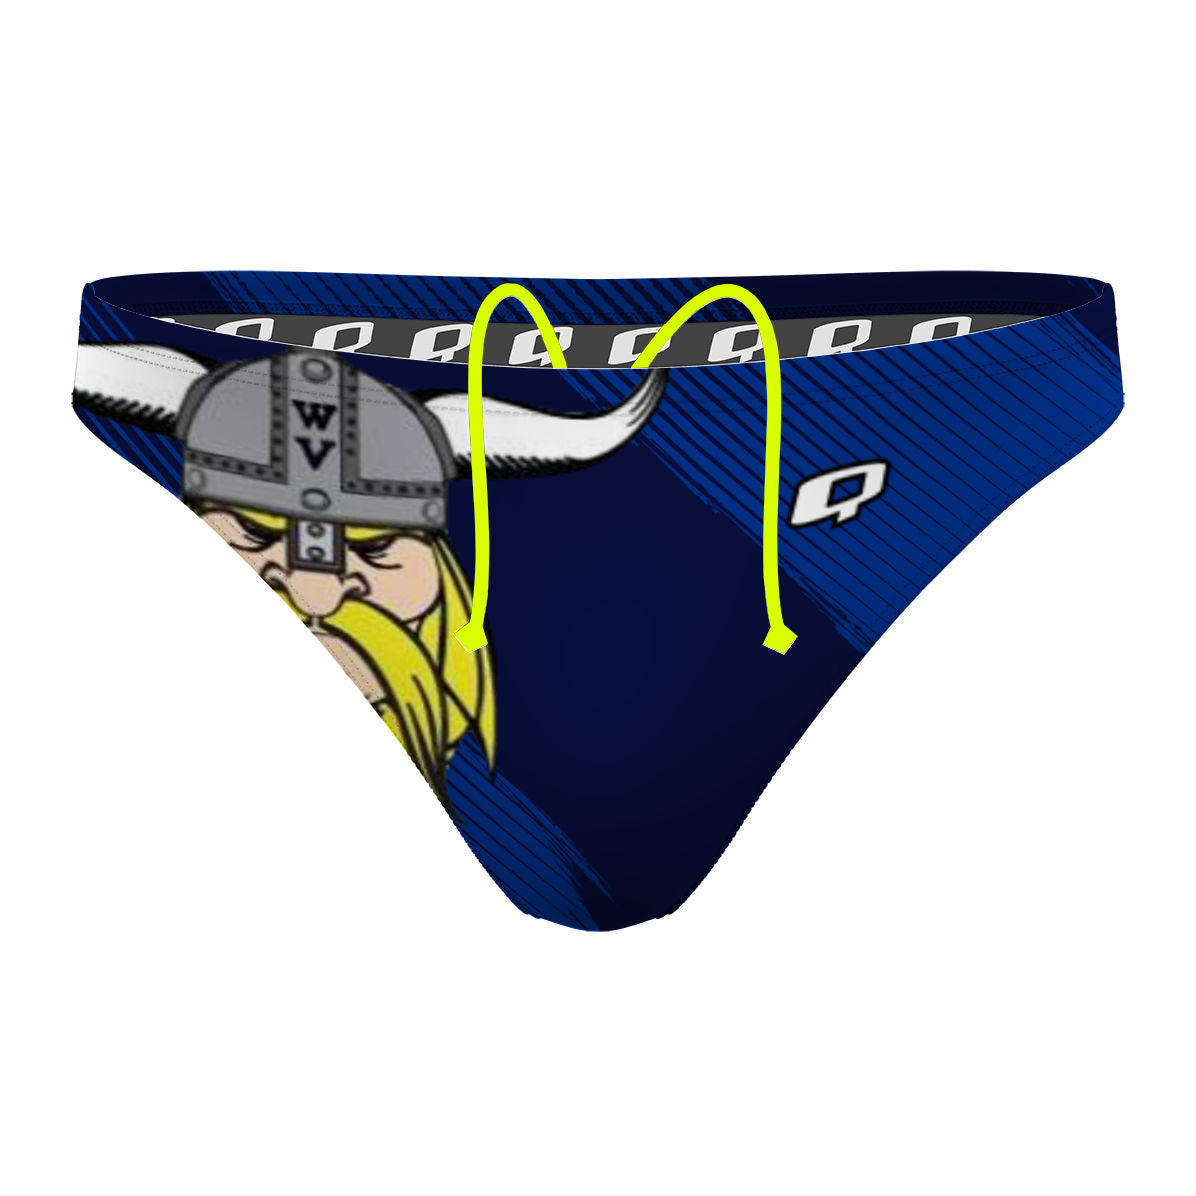 West Valley WP - Waterpolo Brief Swimsuit